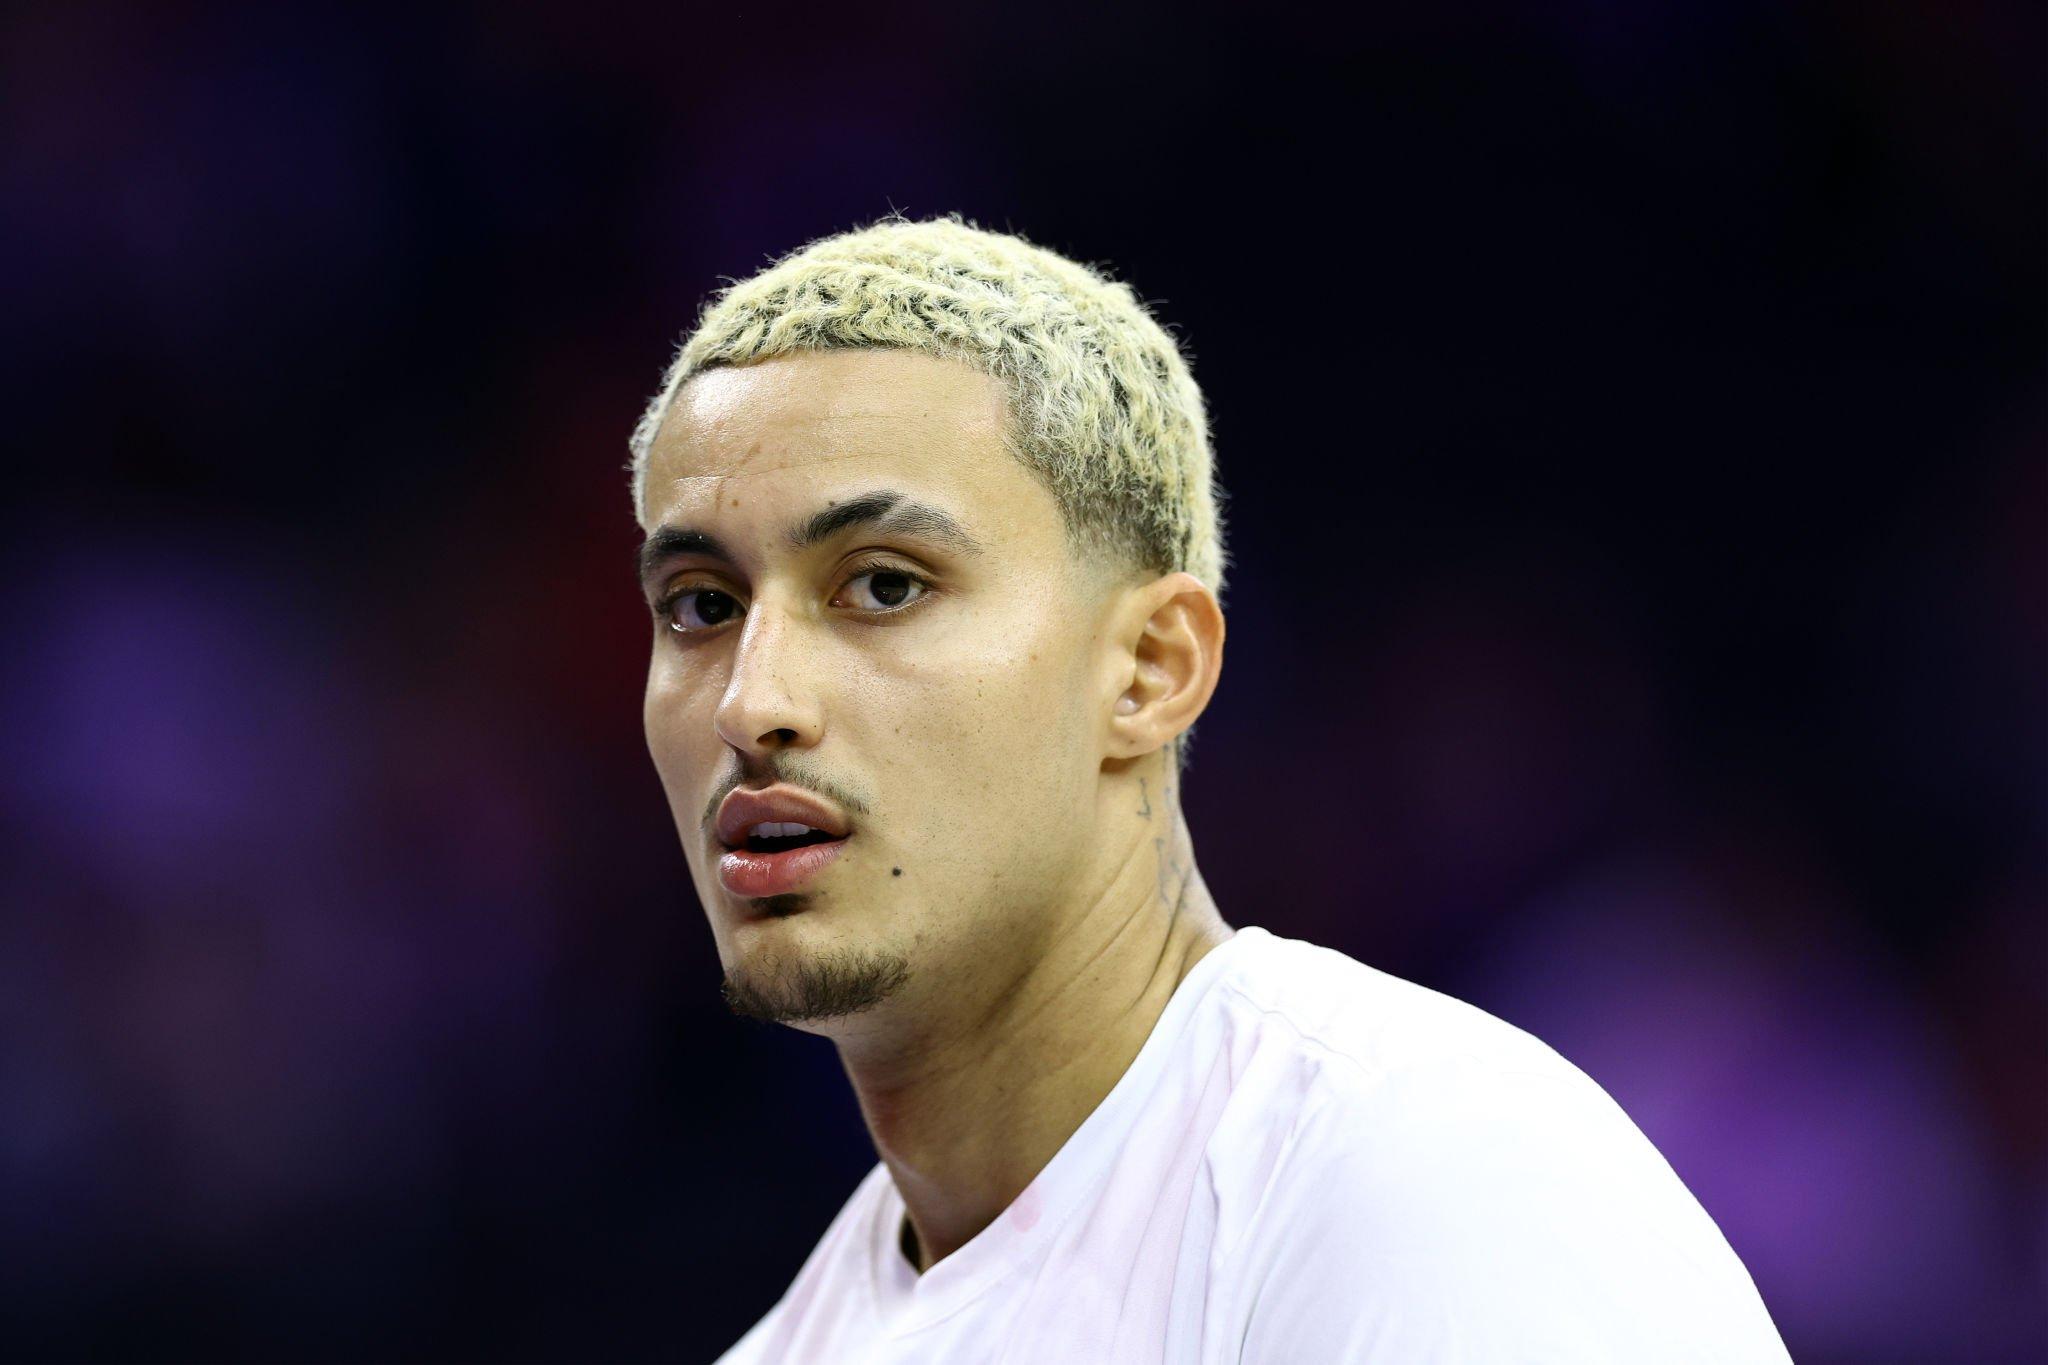 PHILADELPHIA, PENNSYLVANIA - NOVEMBER 06: Kyle Kuzma #33 of the Washington Wizards looks on before playing against the Philadelphia 76ers at the Wells Fargo Center on November 06, 2023 in Philadelphia, Pennsylvania. NOTE TO USER: User expressly acknowledges and agrees that, by downloading and or using this photograph, User is consenting to the terms and conditions of the Getty Images License Agreement. (Photo by Tim Nwachukwu/Getty Images)